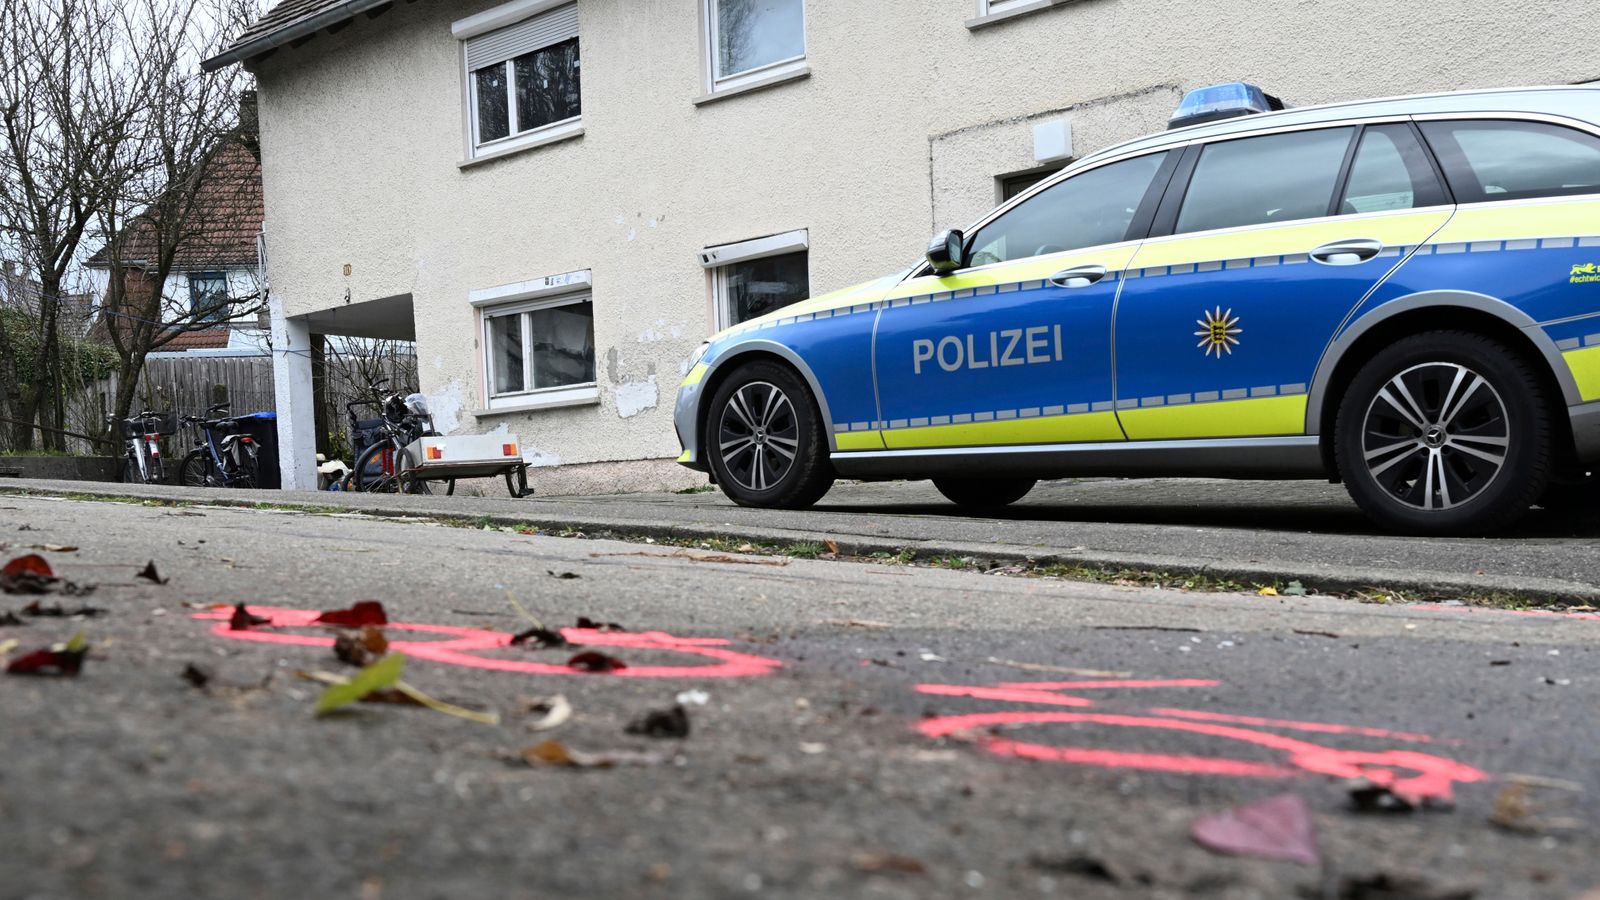 Two girls stabbed on way to school in German town of Illerkirchberg